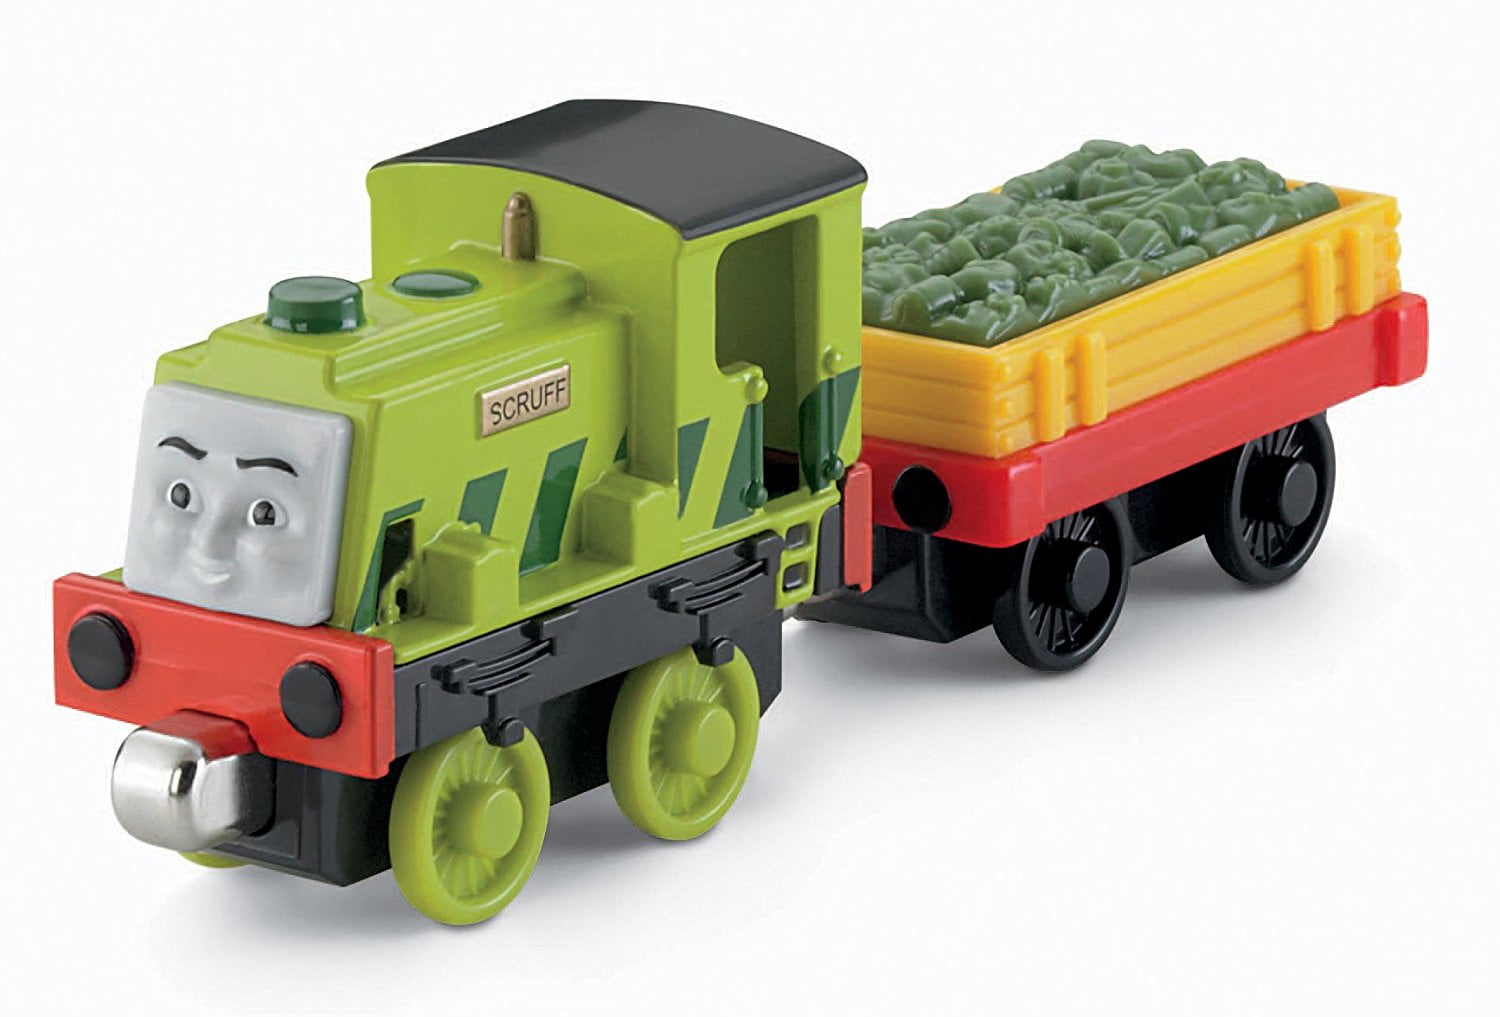 Thomas & Friends 900 DVT09 Adventures Special Edition Original Engine Toy Green for sale online